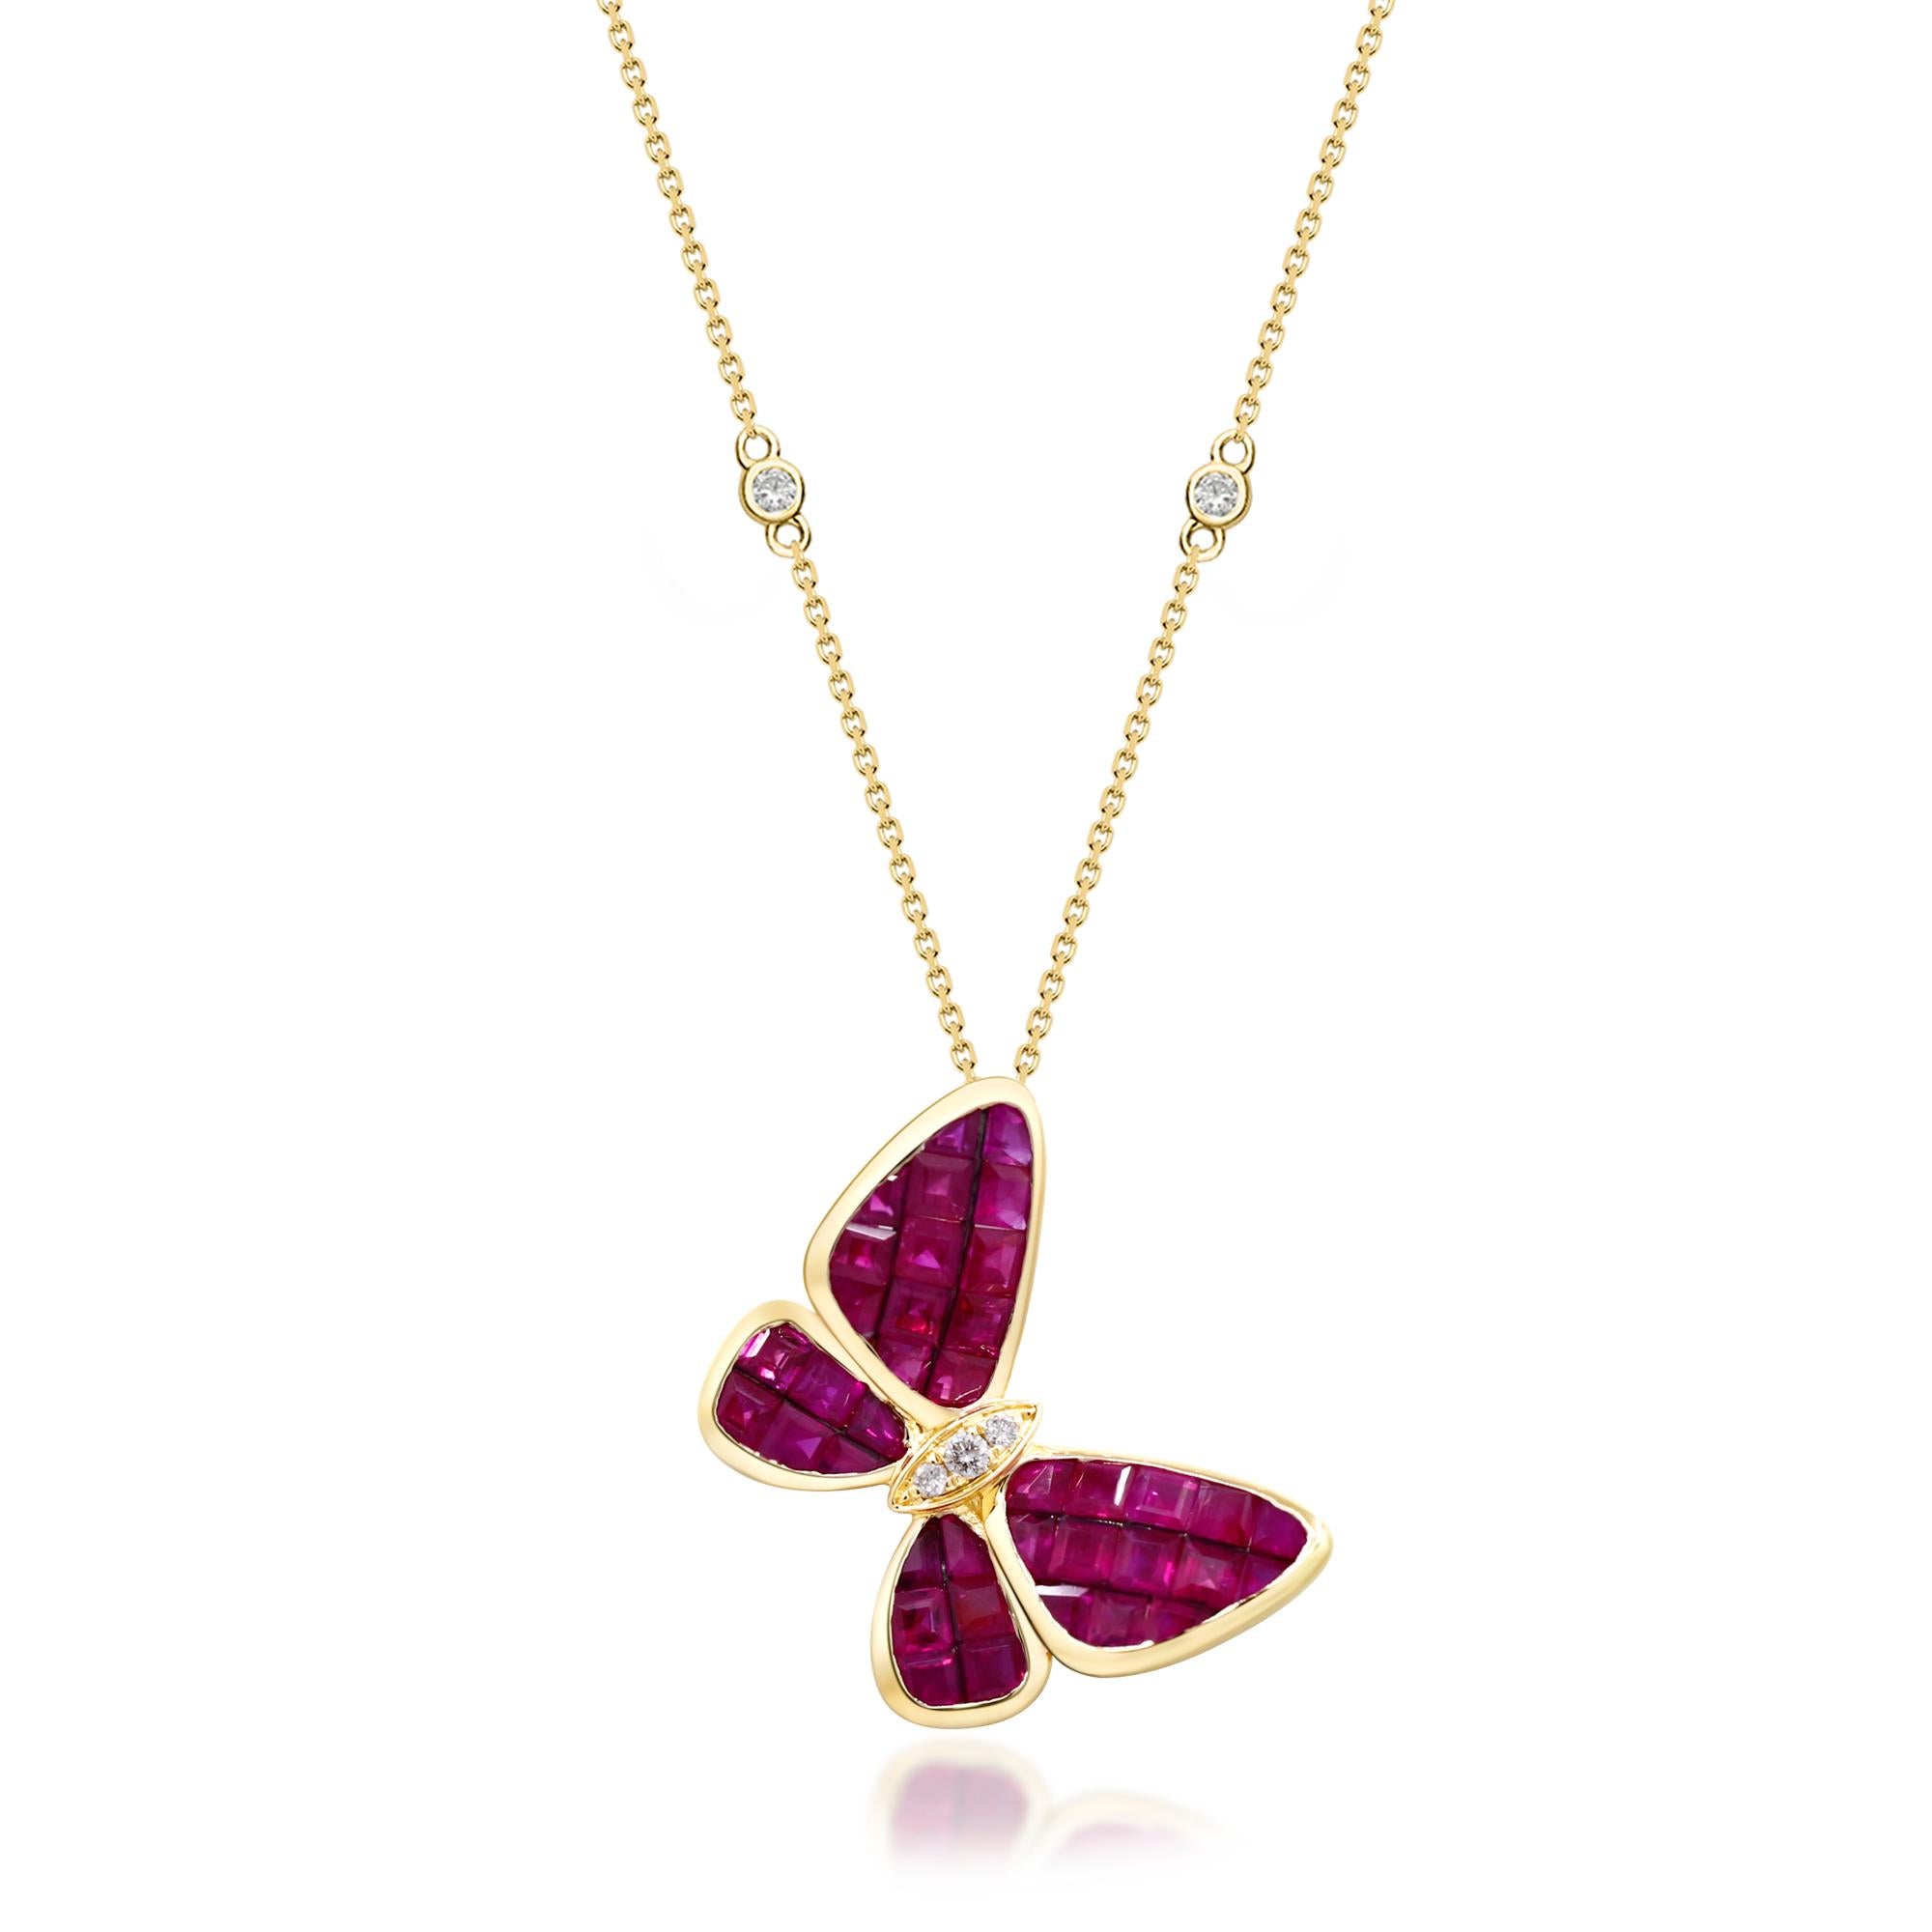 Stunning, timeless, and classy eternity Unique Pendant. Decorate yourself in luxury with this Gin & Grace Pendant. This Pendant is made up of Square-Cut Prong Setting Genuine Ruby (38 pc) 3.61 Carat and Round-Cut Prong Setting Natural Diamond (5